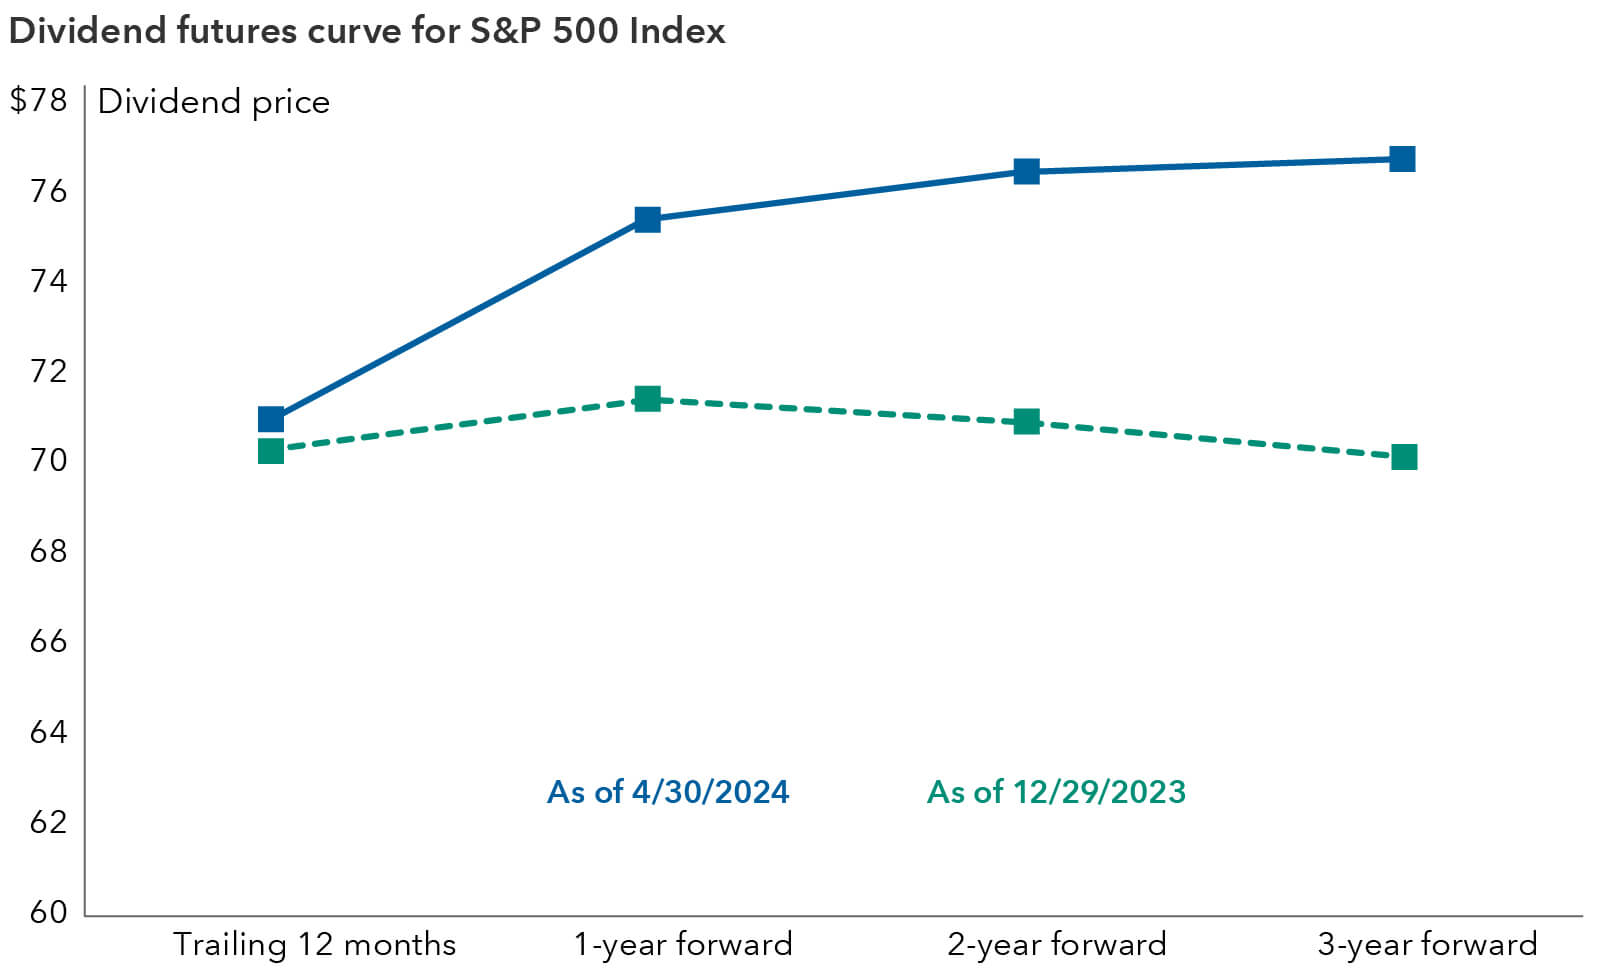 The line chart shows the S&P 500 dividend futures curve steepened over the last quarter, following Meta and Alphabet’s dividend initiation. The S&P 500 dividend futures pricing chart represents the price to own all dividends paid by S&P 500 companies over a specified calendar year, or 2024 in the chart above. The underlying index tracked is the S&P 500 annual dividend points index. The chart has four data points over the duration of each curve as of April 30, 2024, and as of December 29, 2023. The former line in blue has an increasing trend, while the latter green line isn’t as steep, given the data is compiled before Meta and Alphabet’s dividend announcements. 